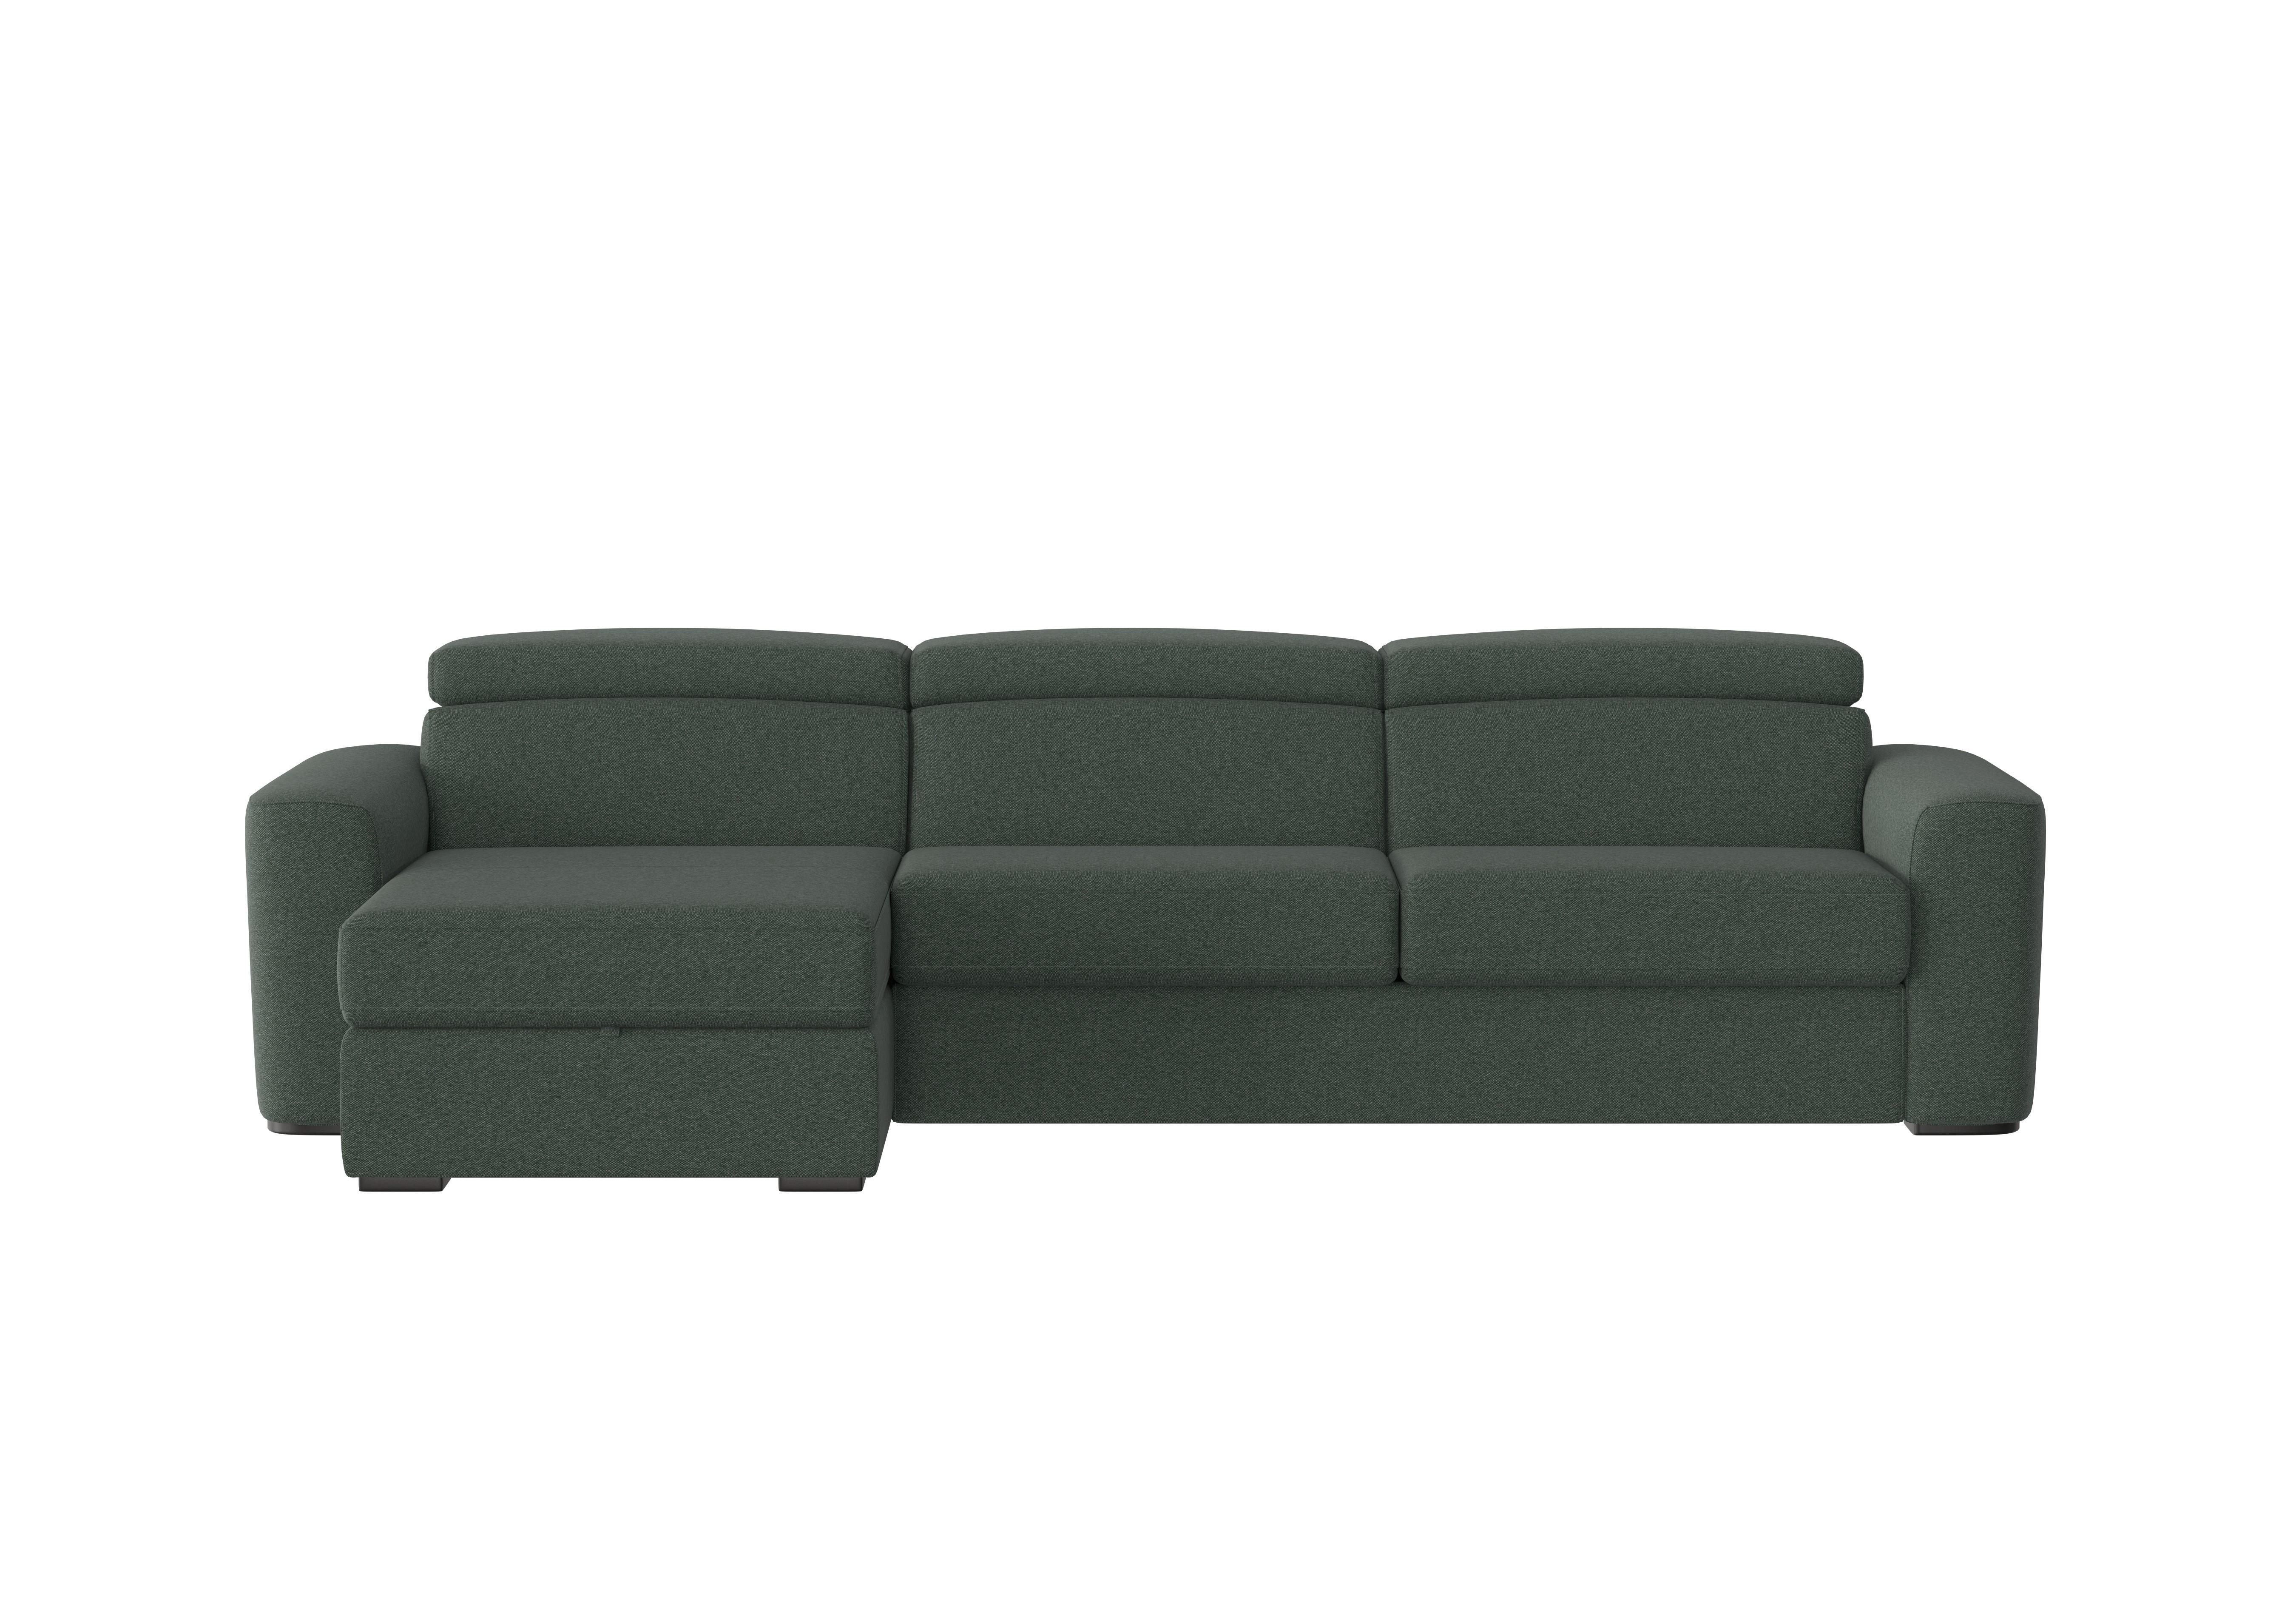 Infinity Fabric Corner Chaise Sofa with Storage in Fab-Ska-R48 Moss Green on Furniture Village